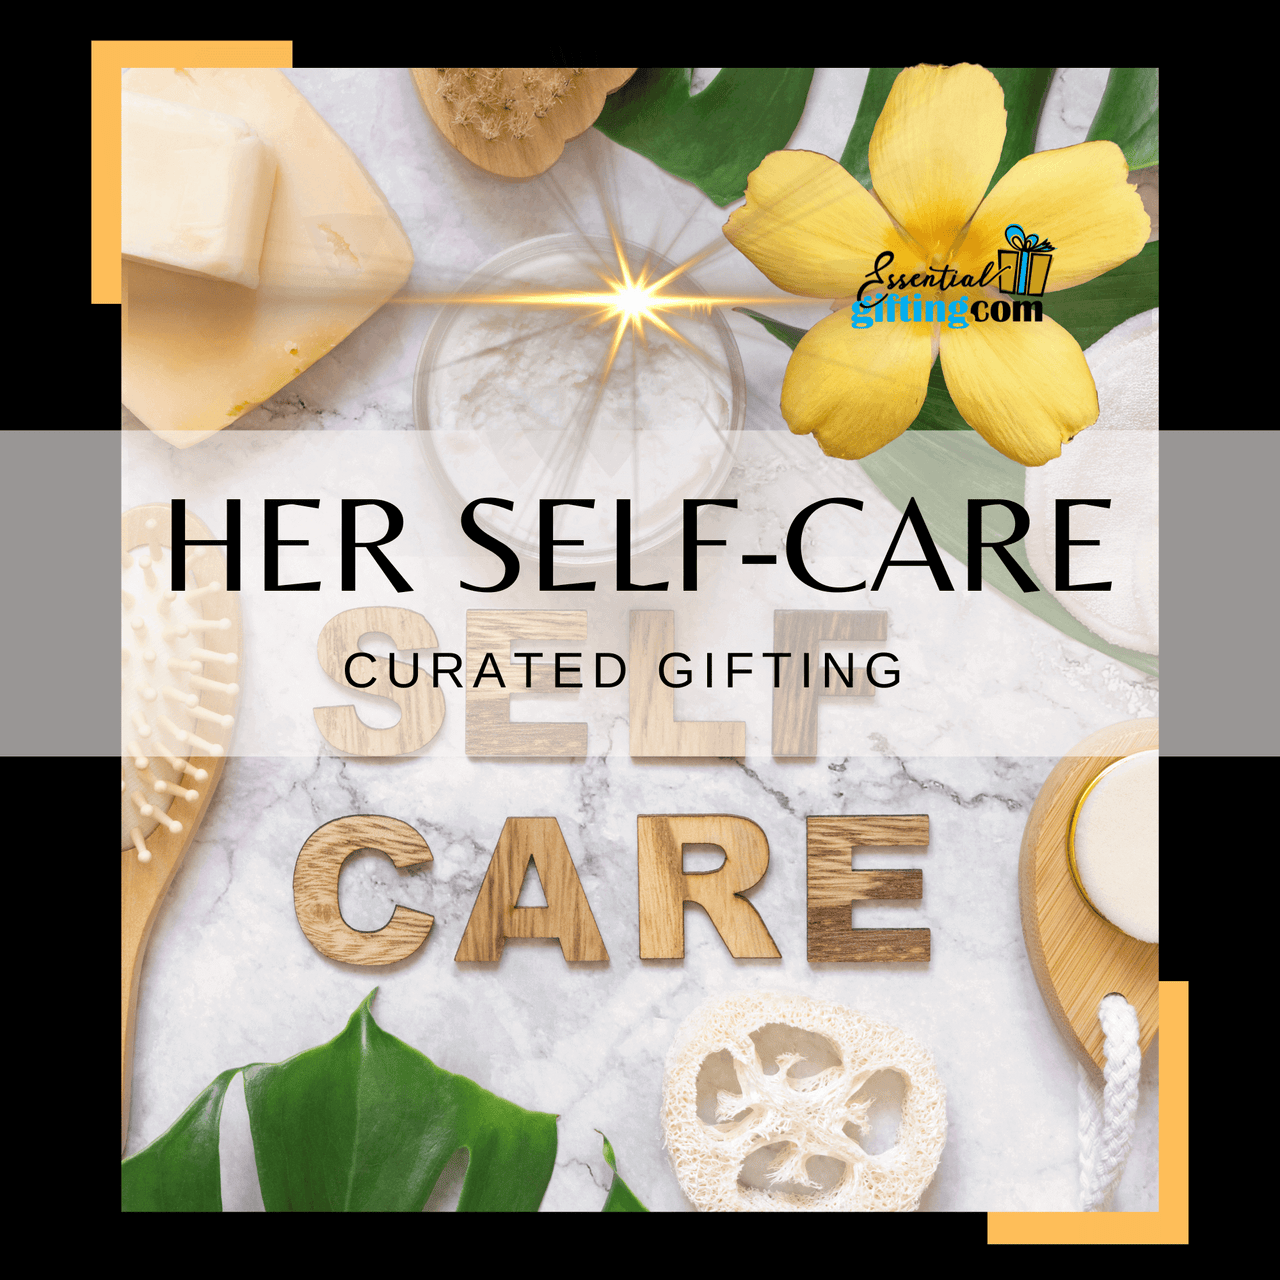 Curated self-care gifts with flower, wooden accents, and essentialgifting.com logo